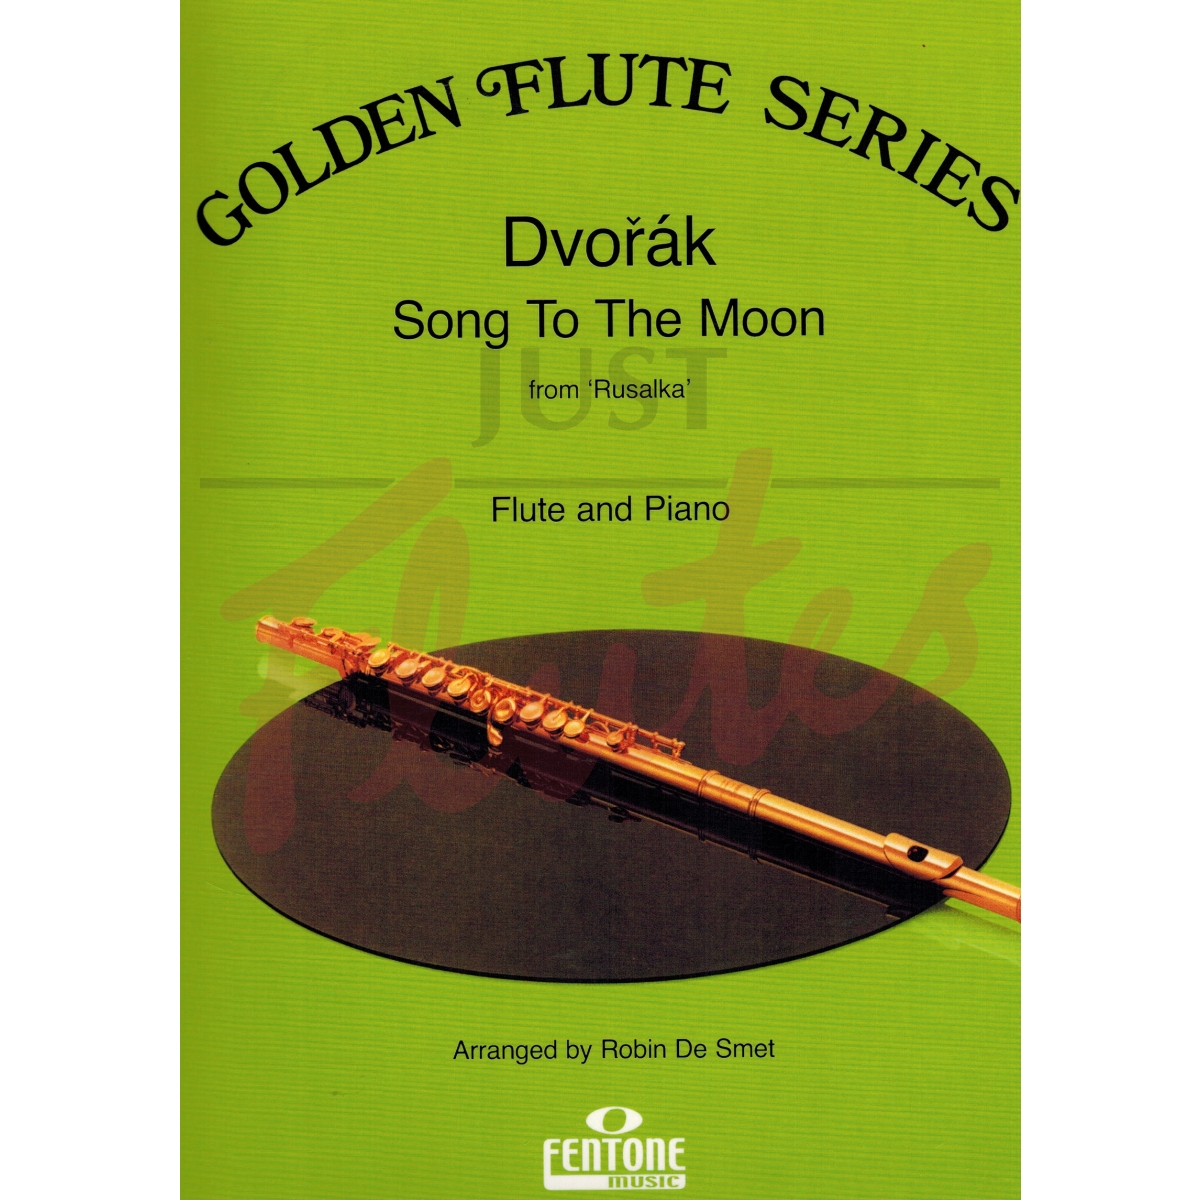 Song to the Moon for Flute and Piano